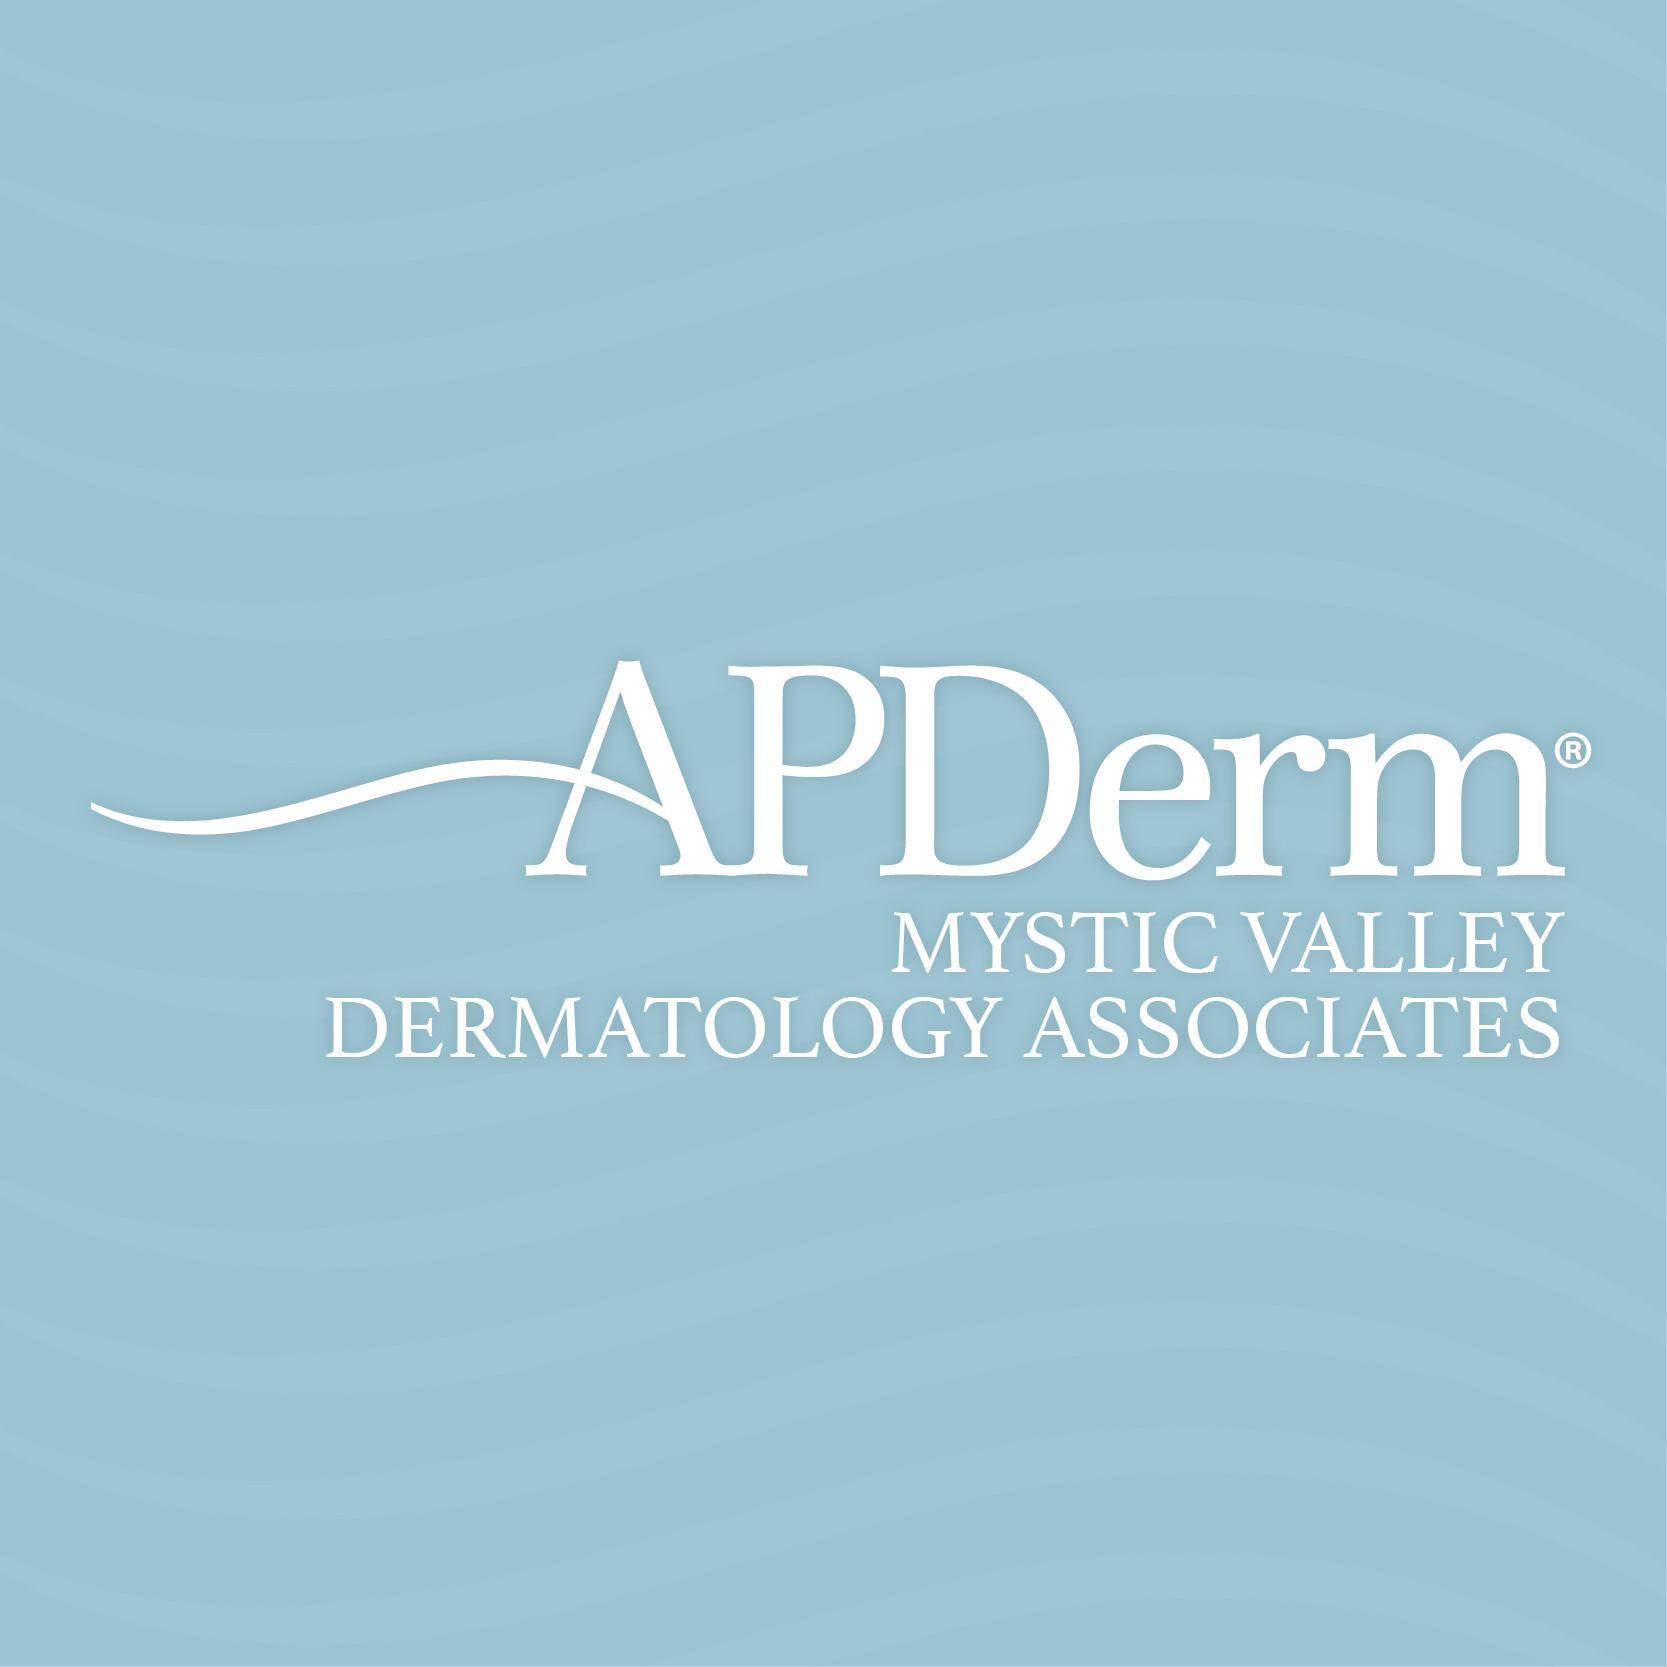 Mystic Valley Dermatology Associates - Winchester, MA 01890 - (781)438-6350 | ShowMeLocal.com